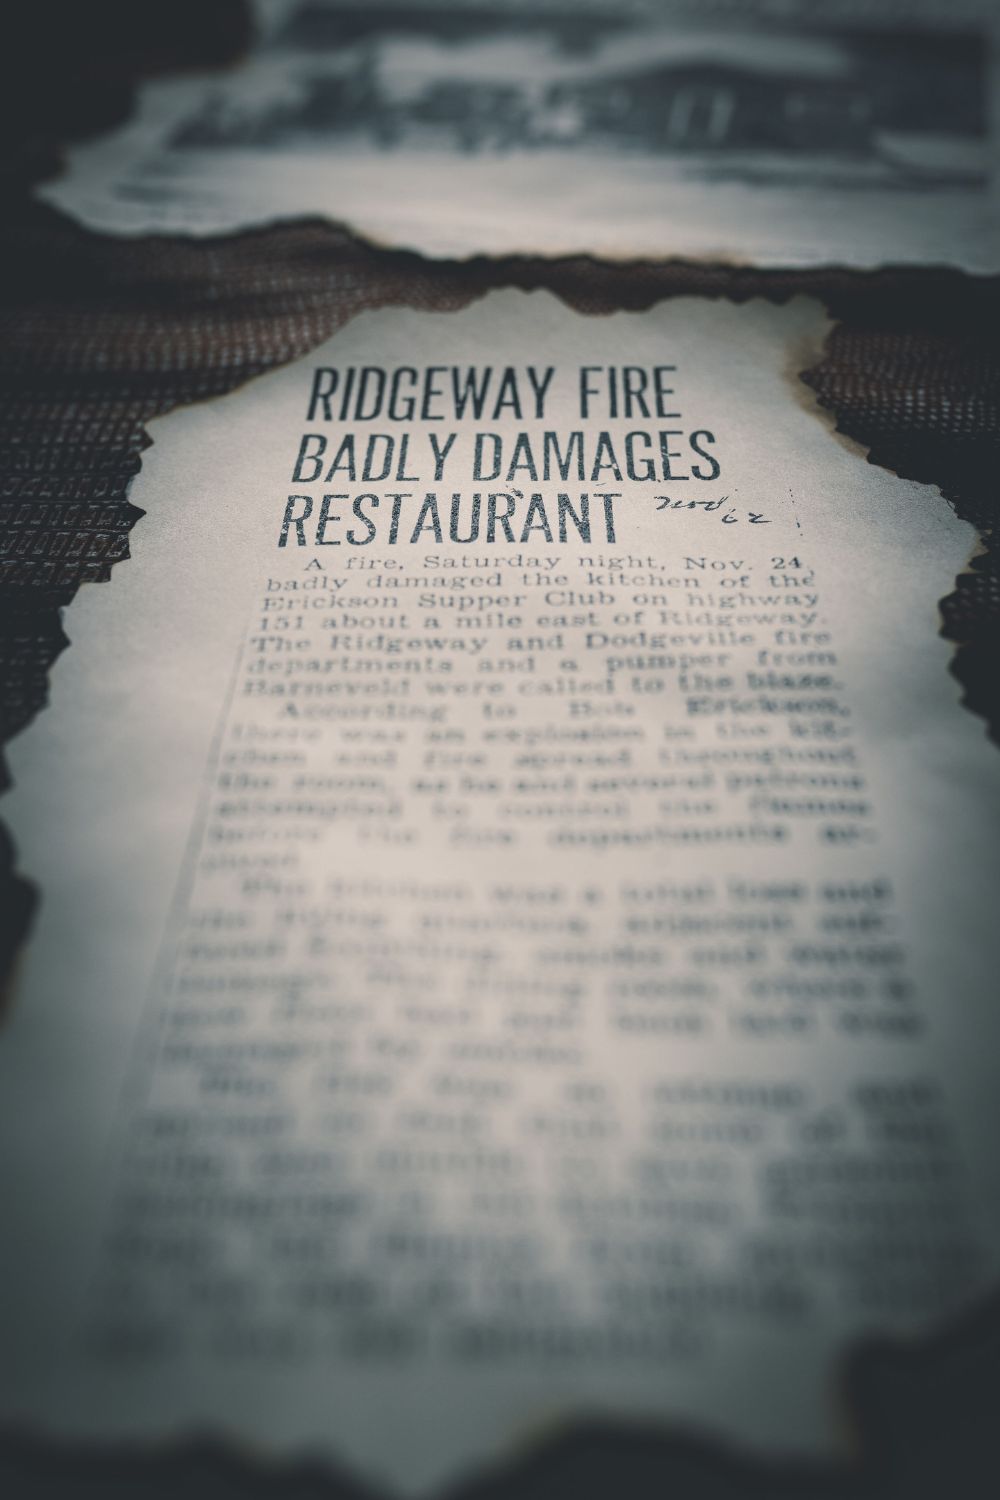 Newspaper clipping of the Ridgeway fire that damaged Hi Point Steakhouse in 1962.